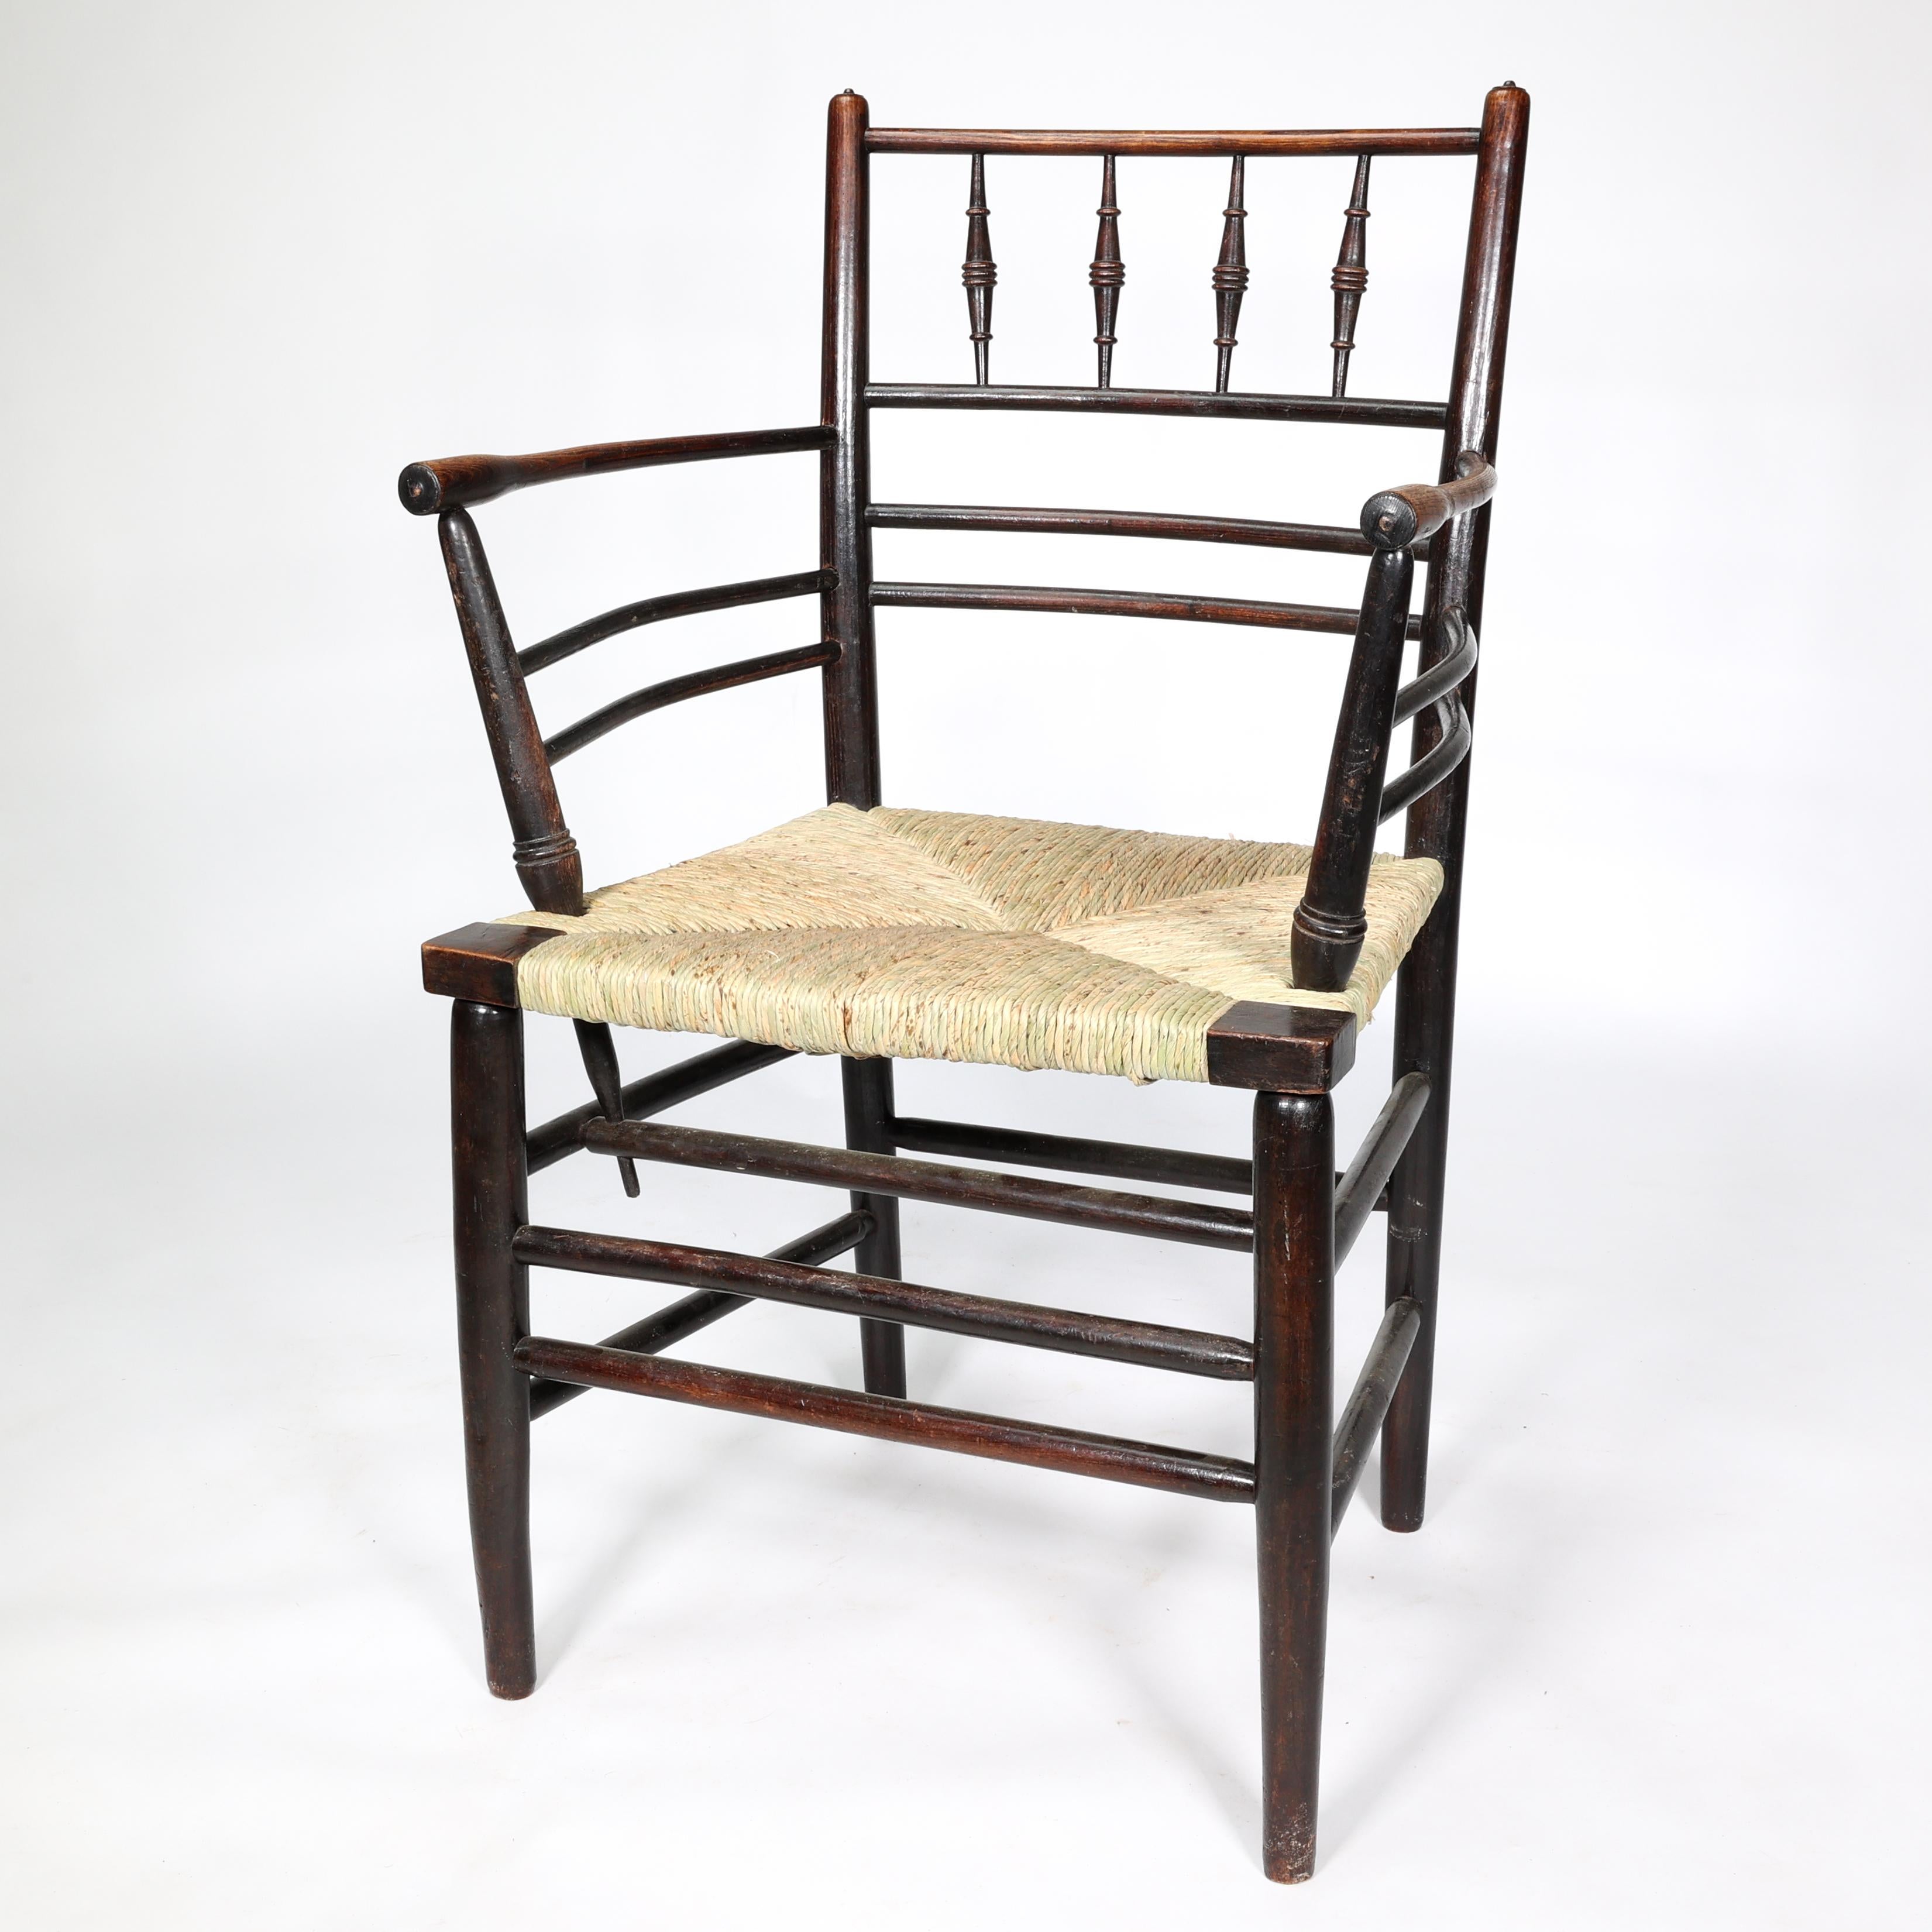 English William Morris, A Classic Arts & Crafts Ebonised Armchair from the Sussex Range.